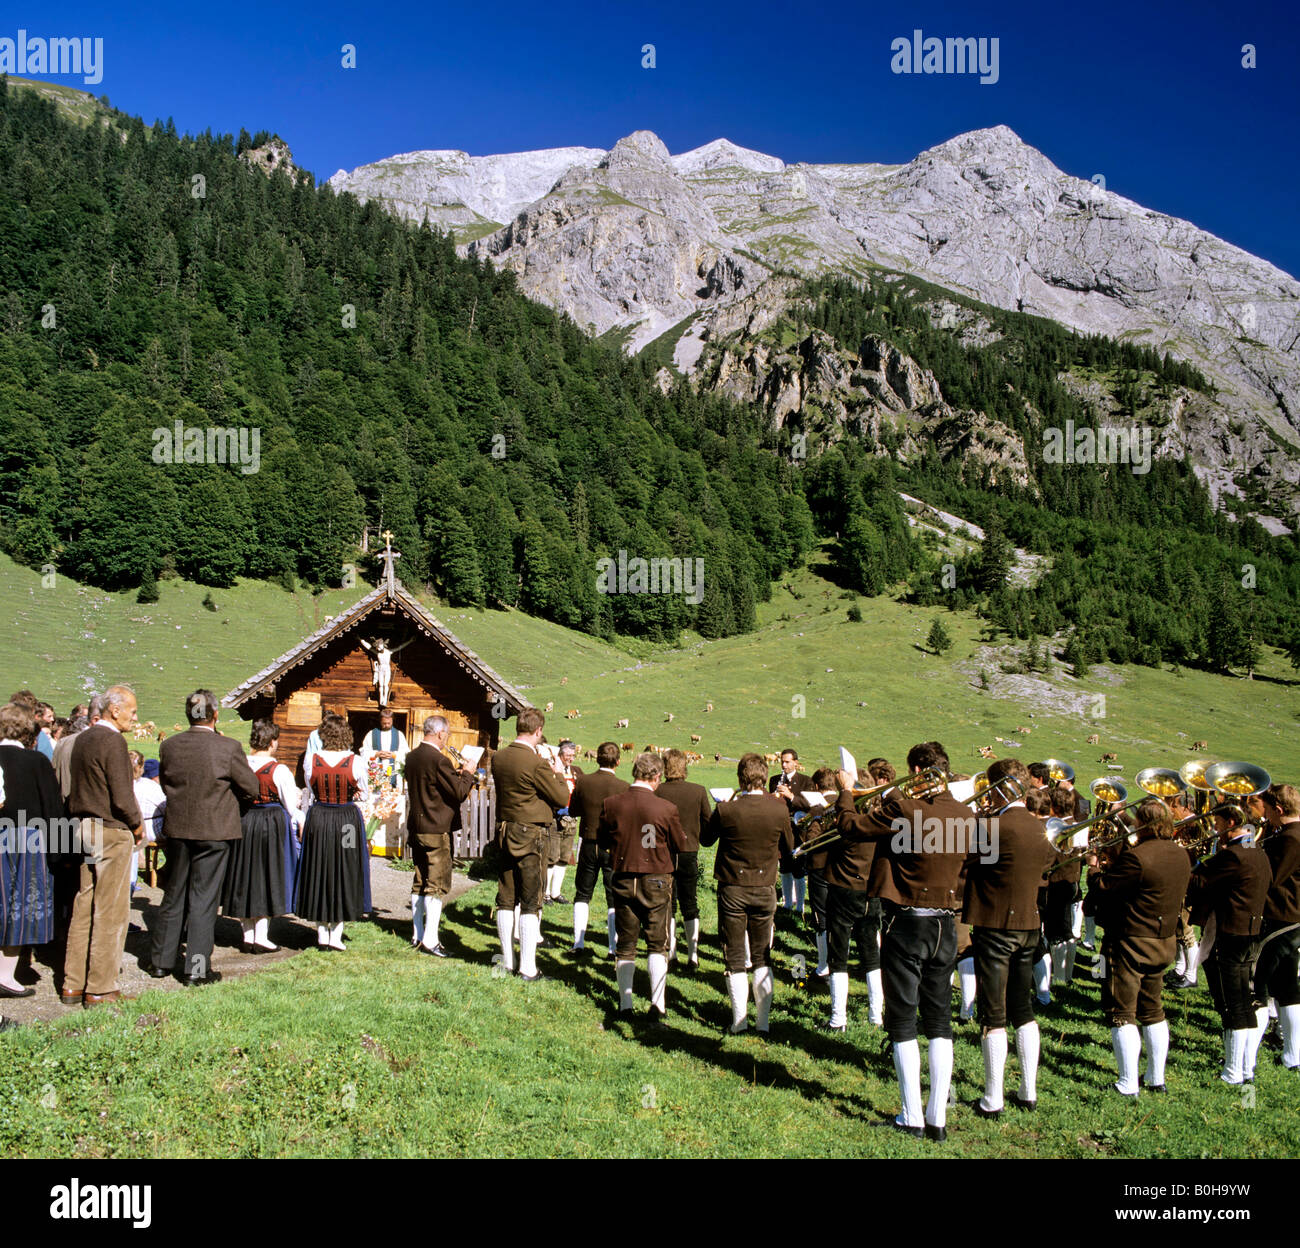 Outdoor mass held at Engalm alpine pasture, congregation dressed in traditional lederhosen, Eng, Gamsjoch, Ahornboden, Tyrol, A Stock Photo